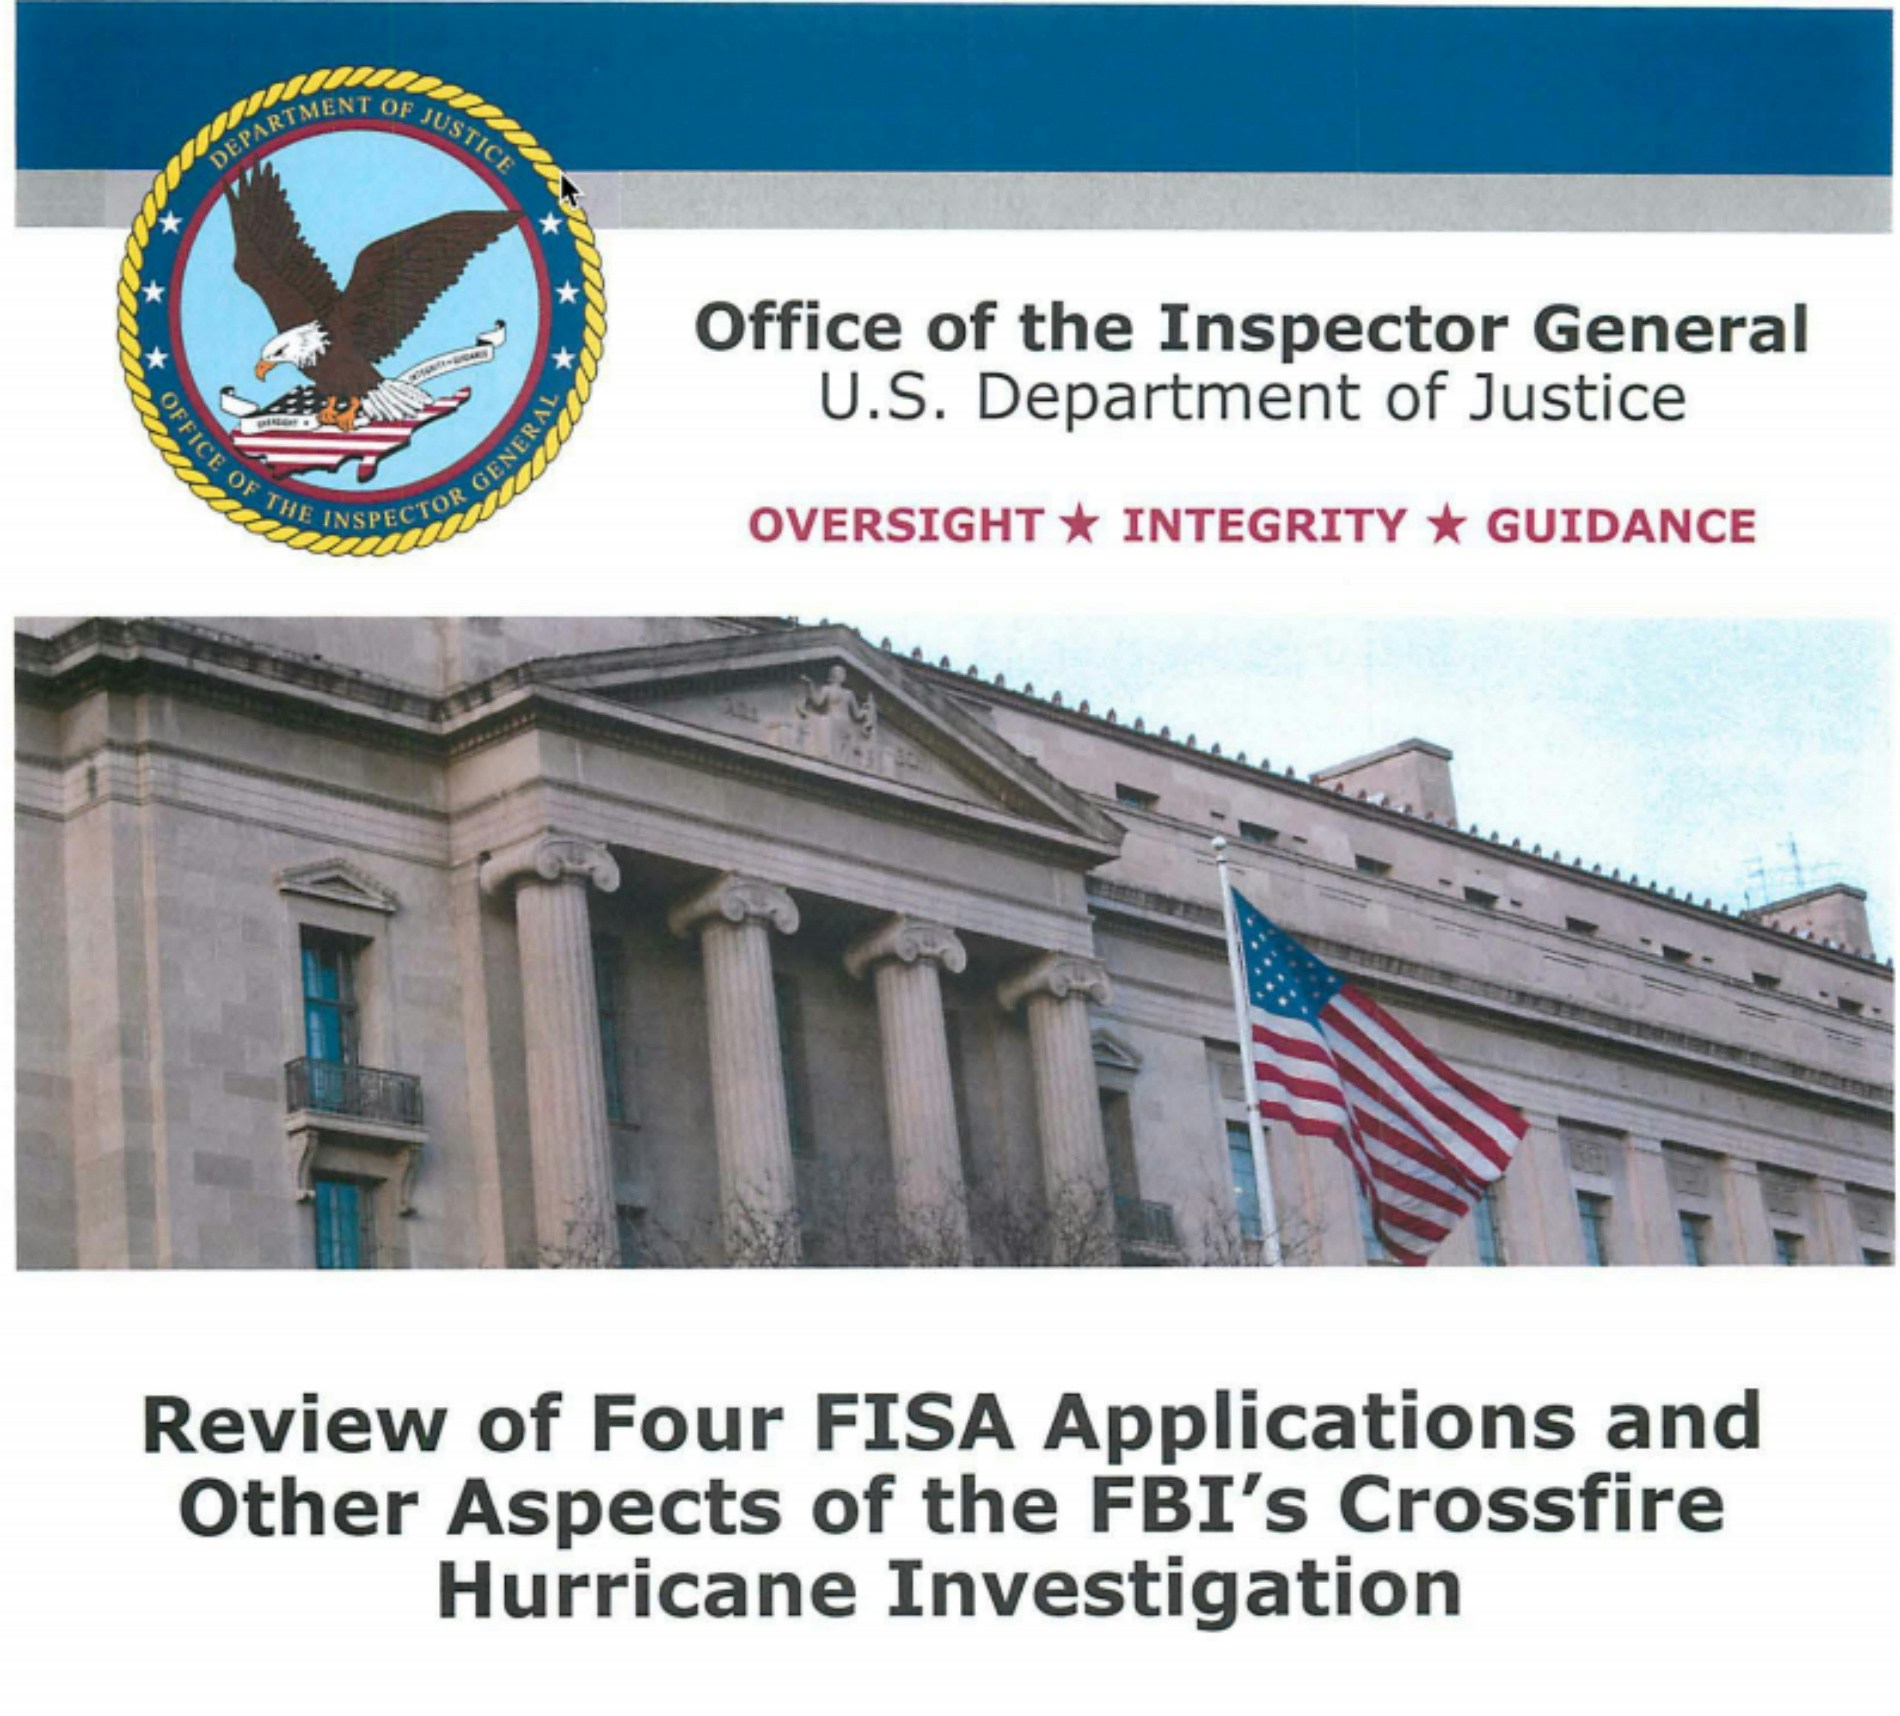 The Inspector General S Report On 2016 Fbi Spying Reveals A